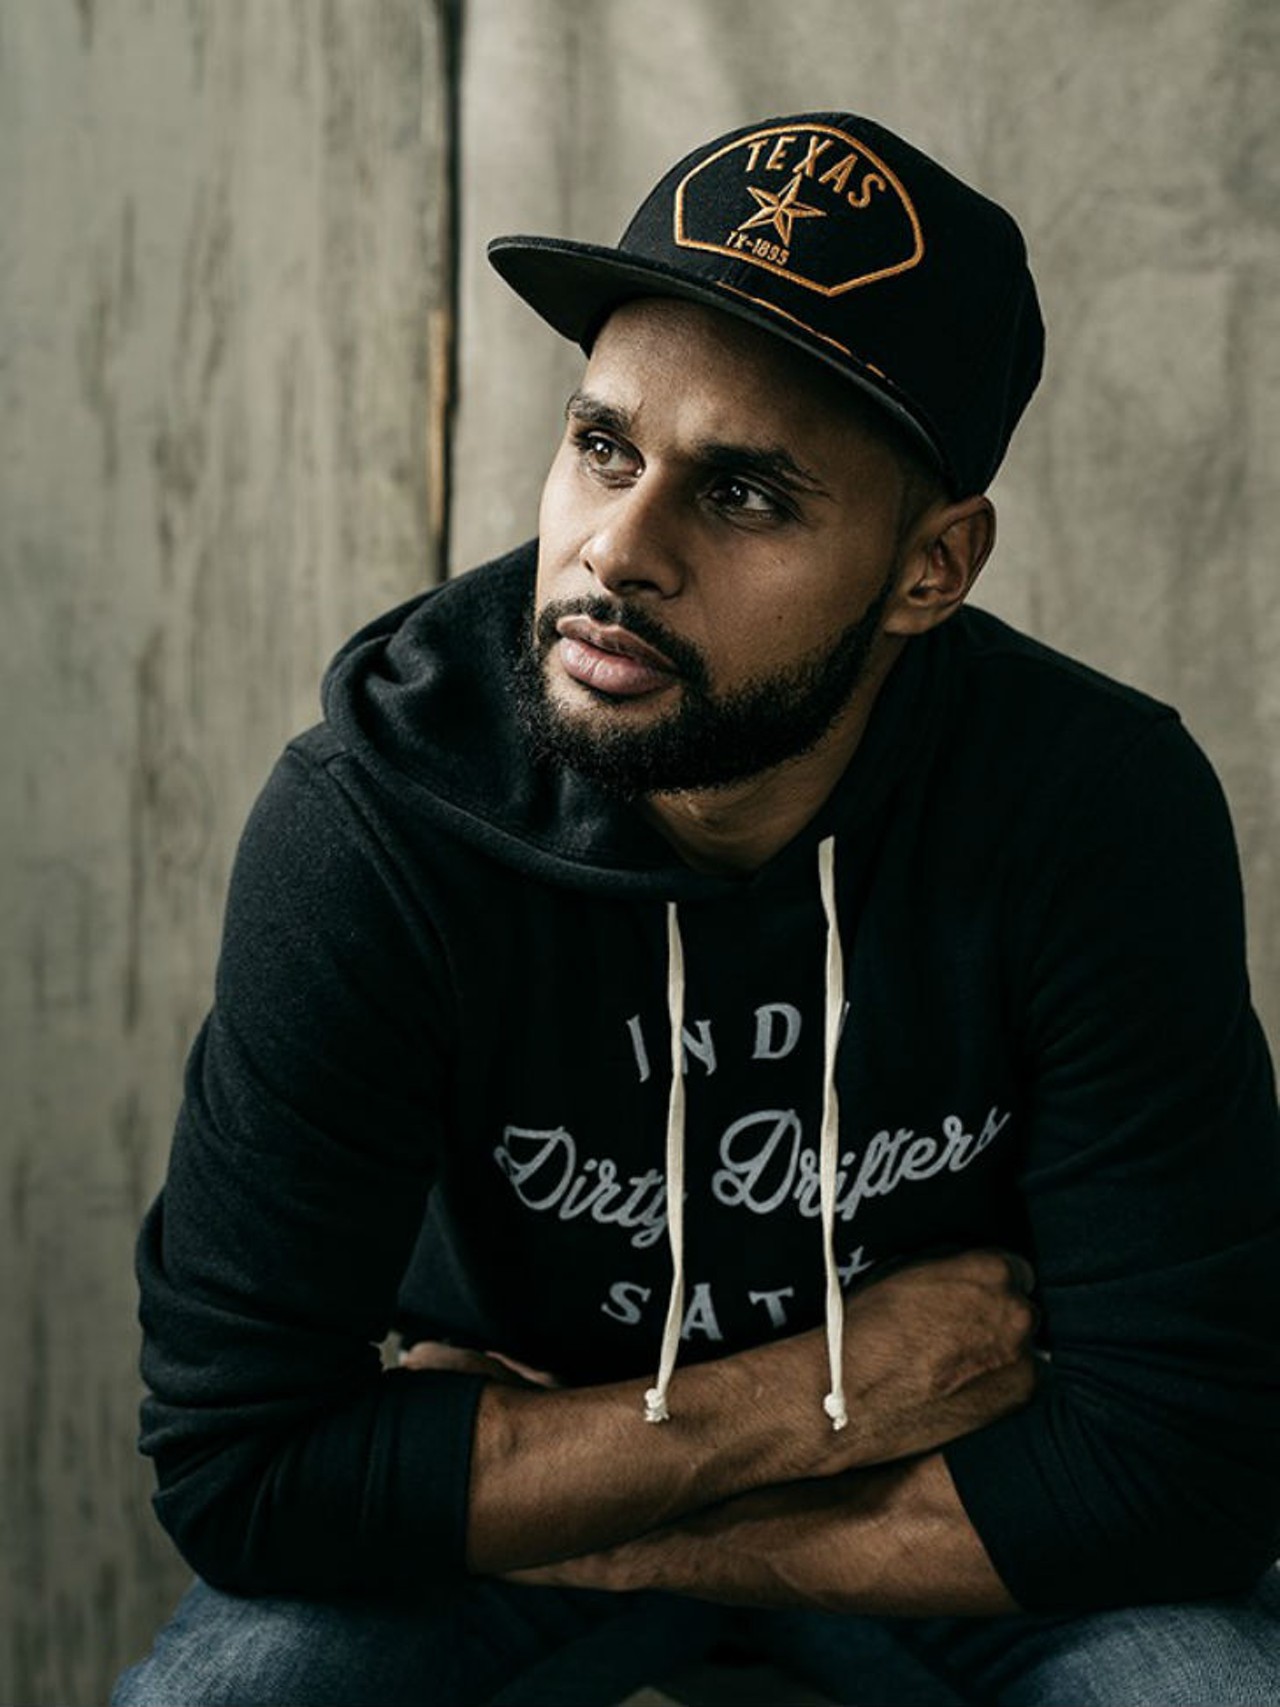 Patty Mills 
Point guard, 
San Antonio Spurs   
Now in his fifth season with the Spurs, backup point guard Patty Mills has fully settled into his comfort zone in South Texas. He drinks local java from Indy Coffee Co., enjoys dining at the Pearl and has rocked out at SXSW. He also dreads allergy season, just like the rest of us.
Read more.